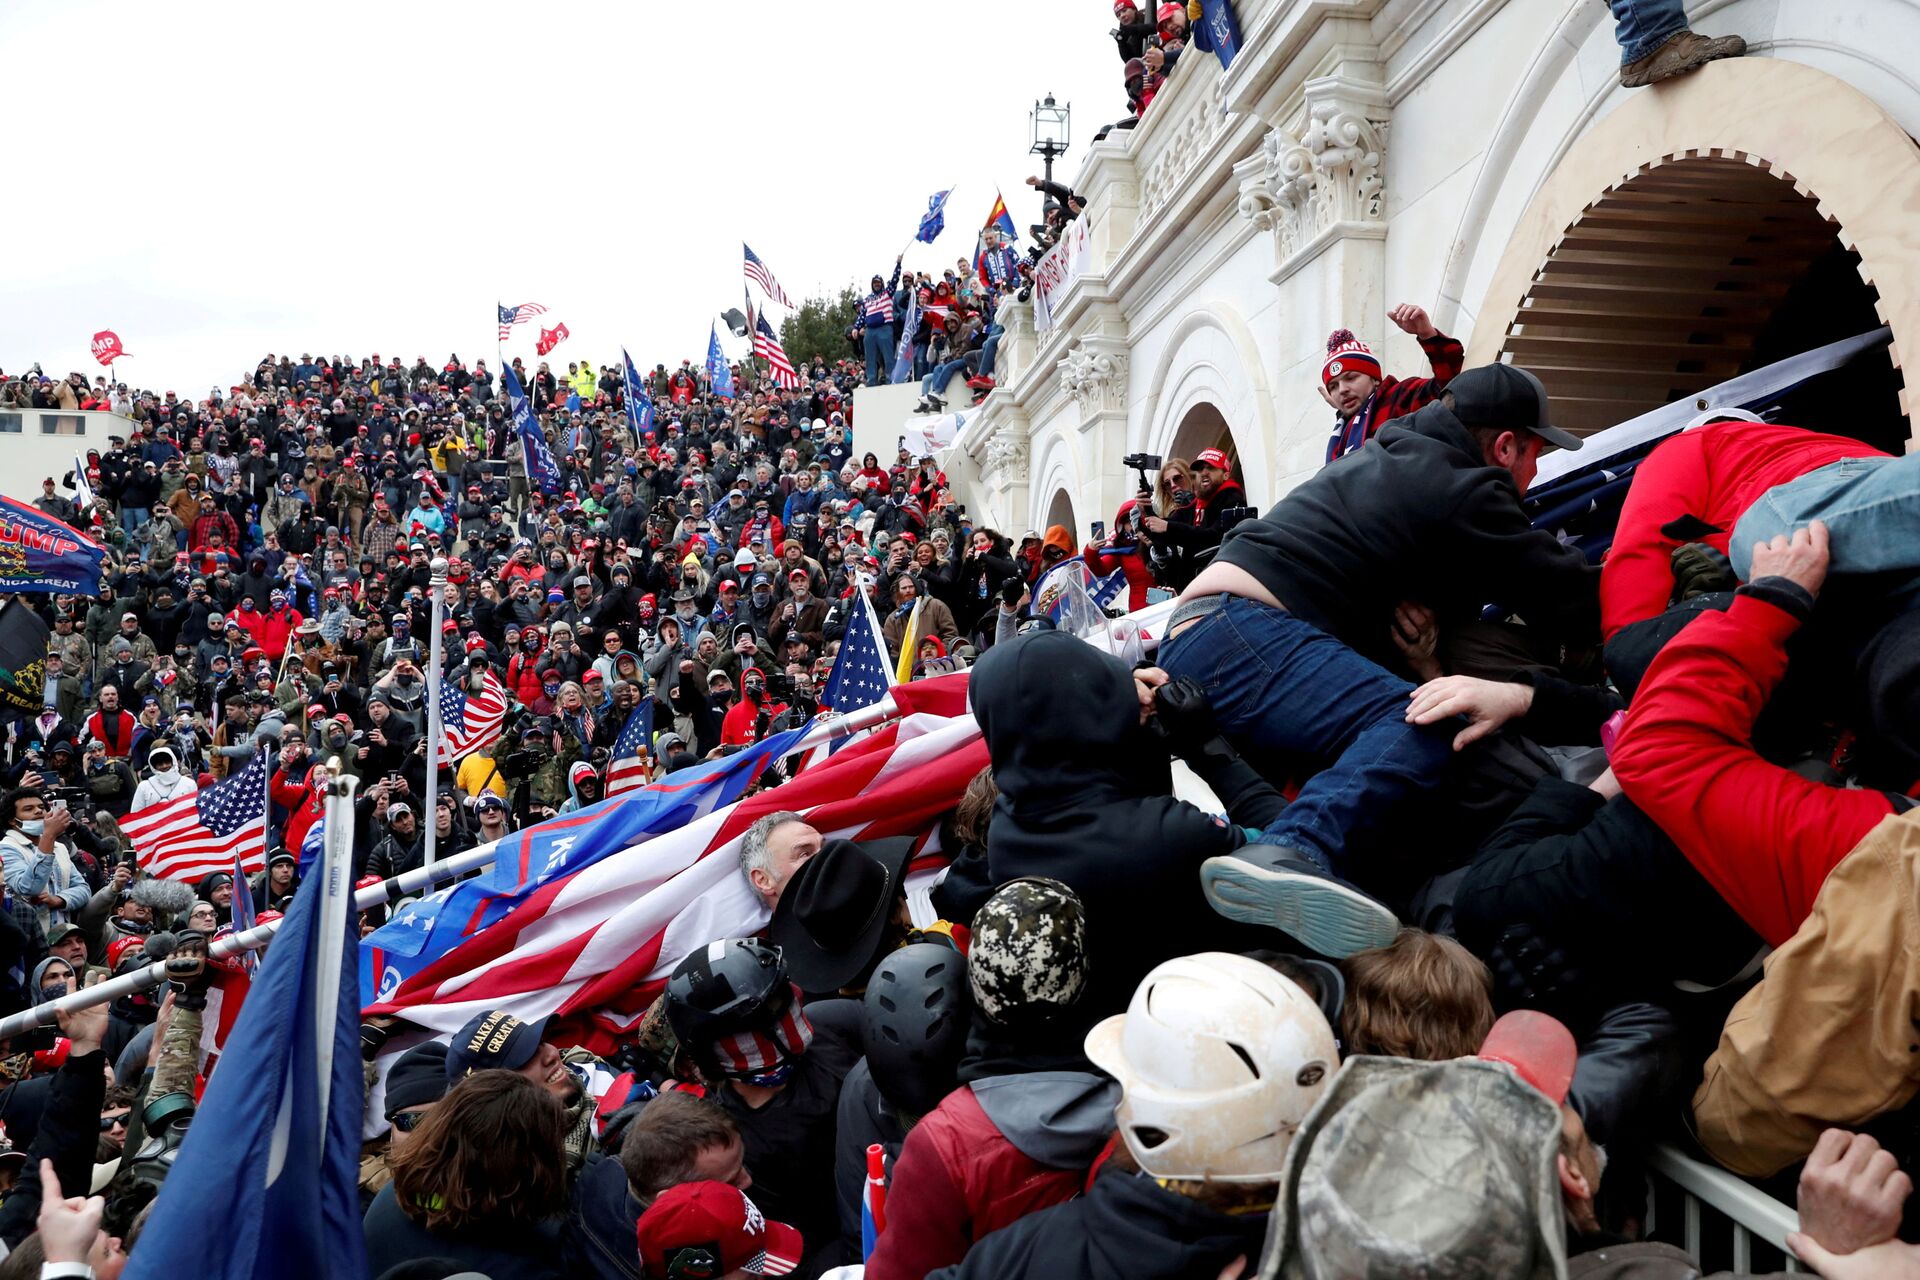  Pro-Trump protesters storm into the U.S. Capitol during clashes with police, during a rally to contest the certification of the 2020 U.S. presidential election results by the U.S. Congress, in Washington, U.S, January 6, 2021 - Sputnik International, 1920, 18.09.2021